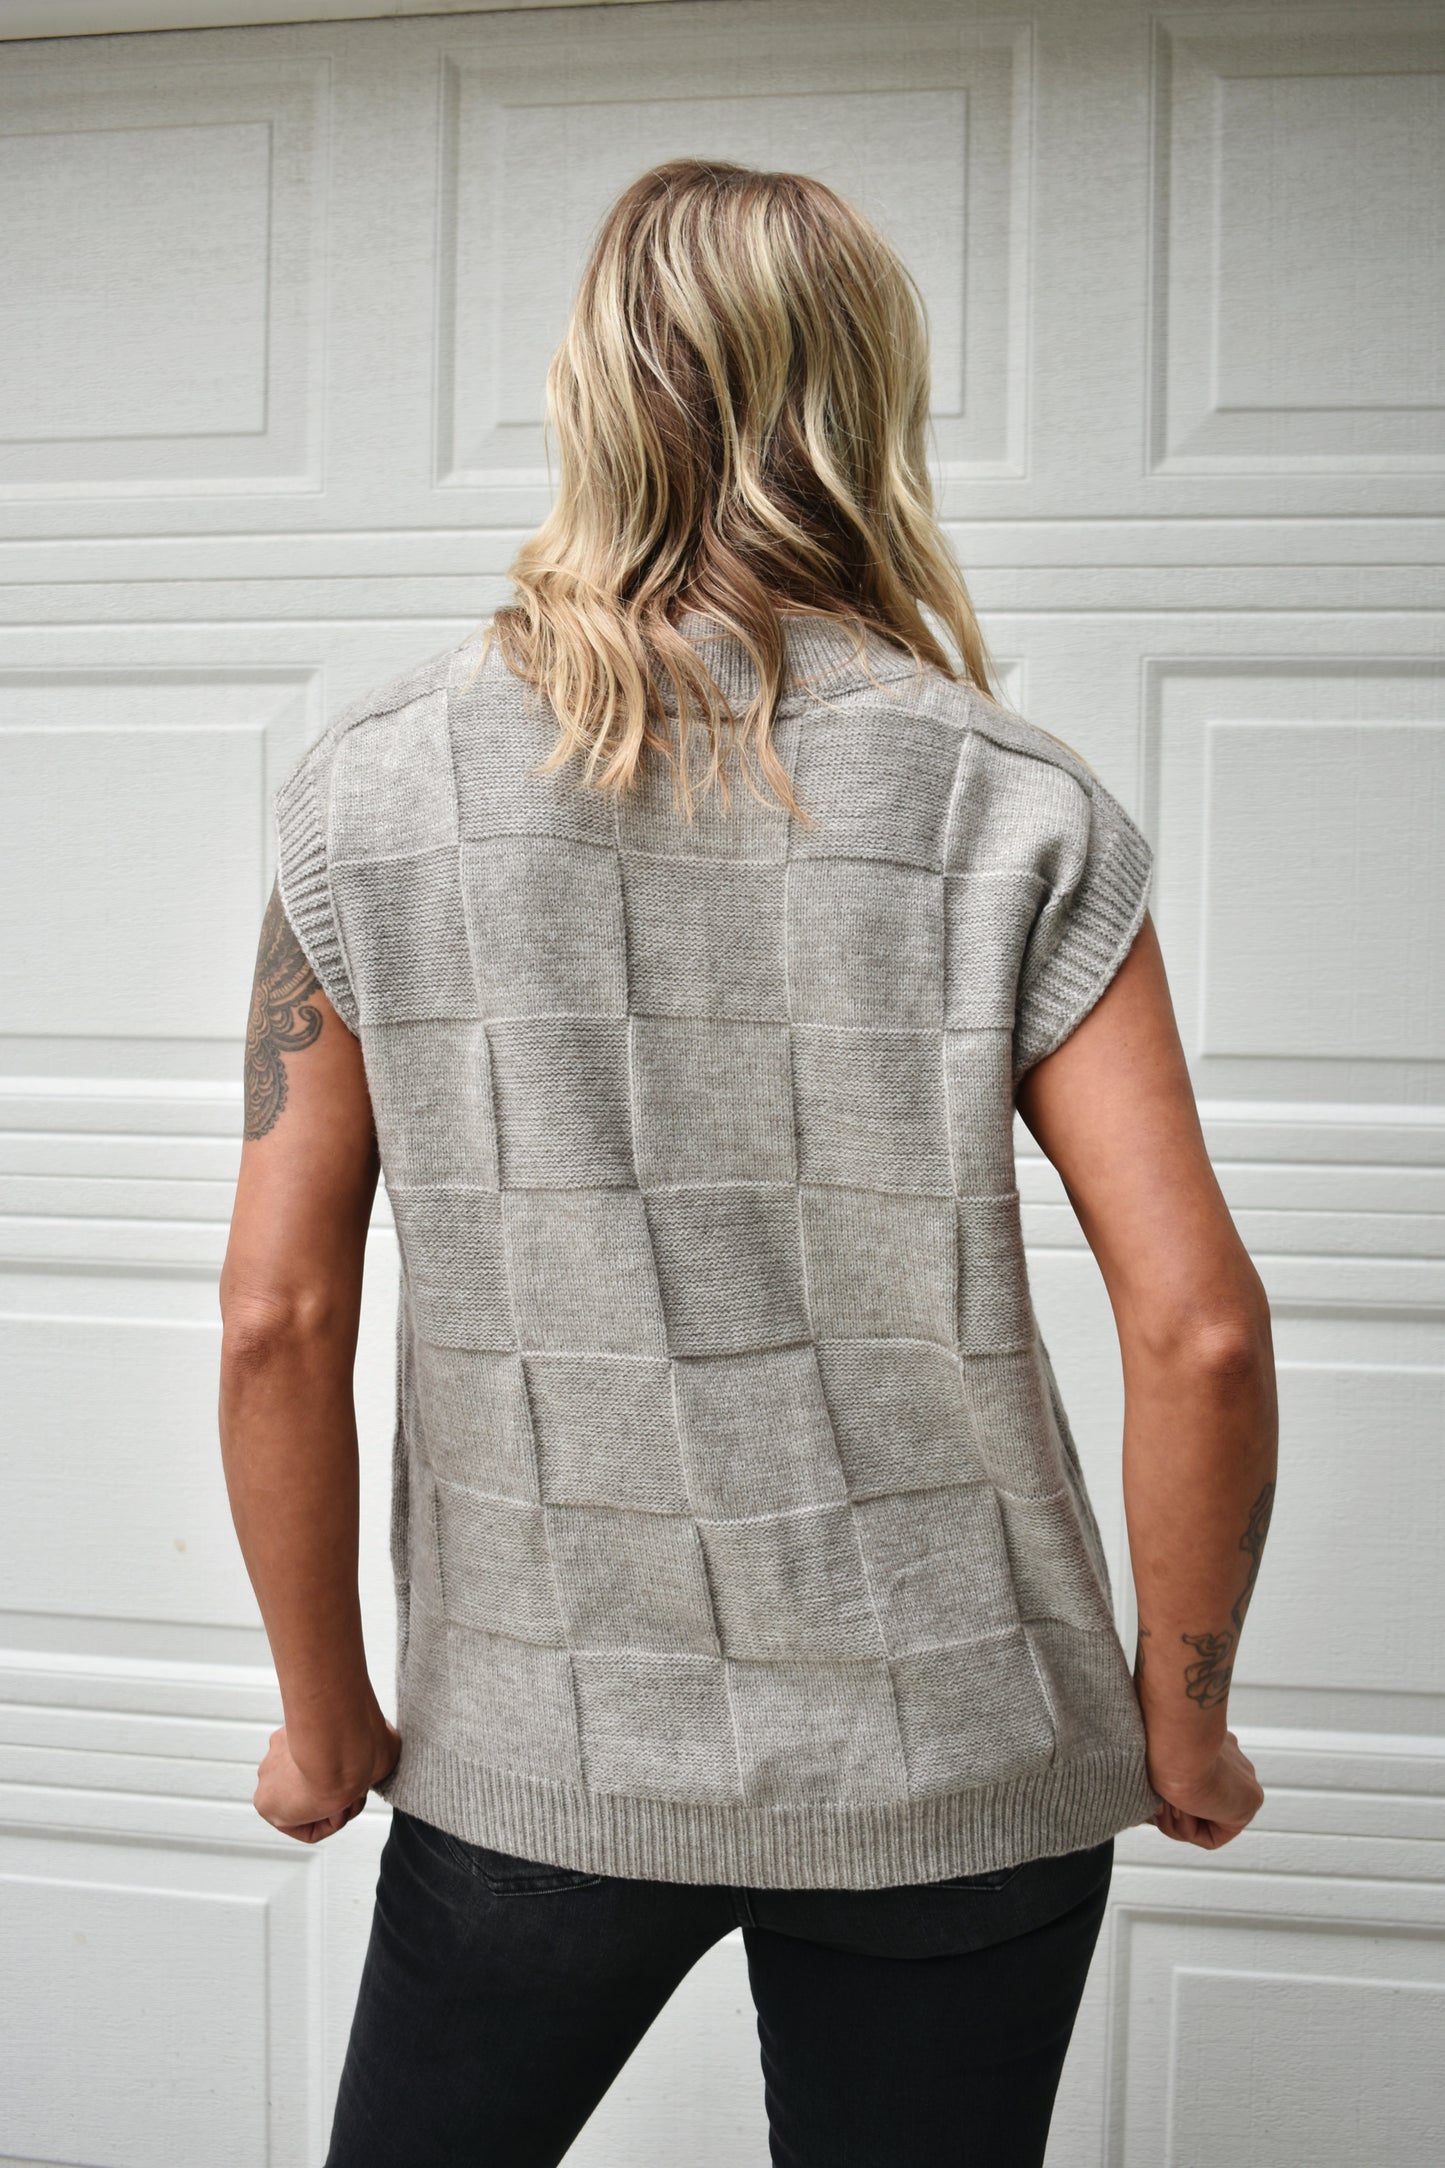 Light grey sweater vest with knit basket weave fabric and ribbed neckline, shoulders, and hem. V-neckline and waist-length cut